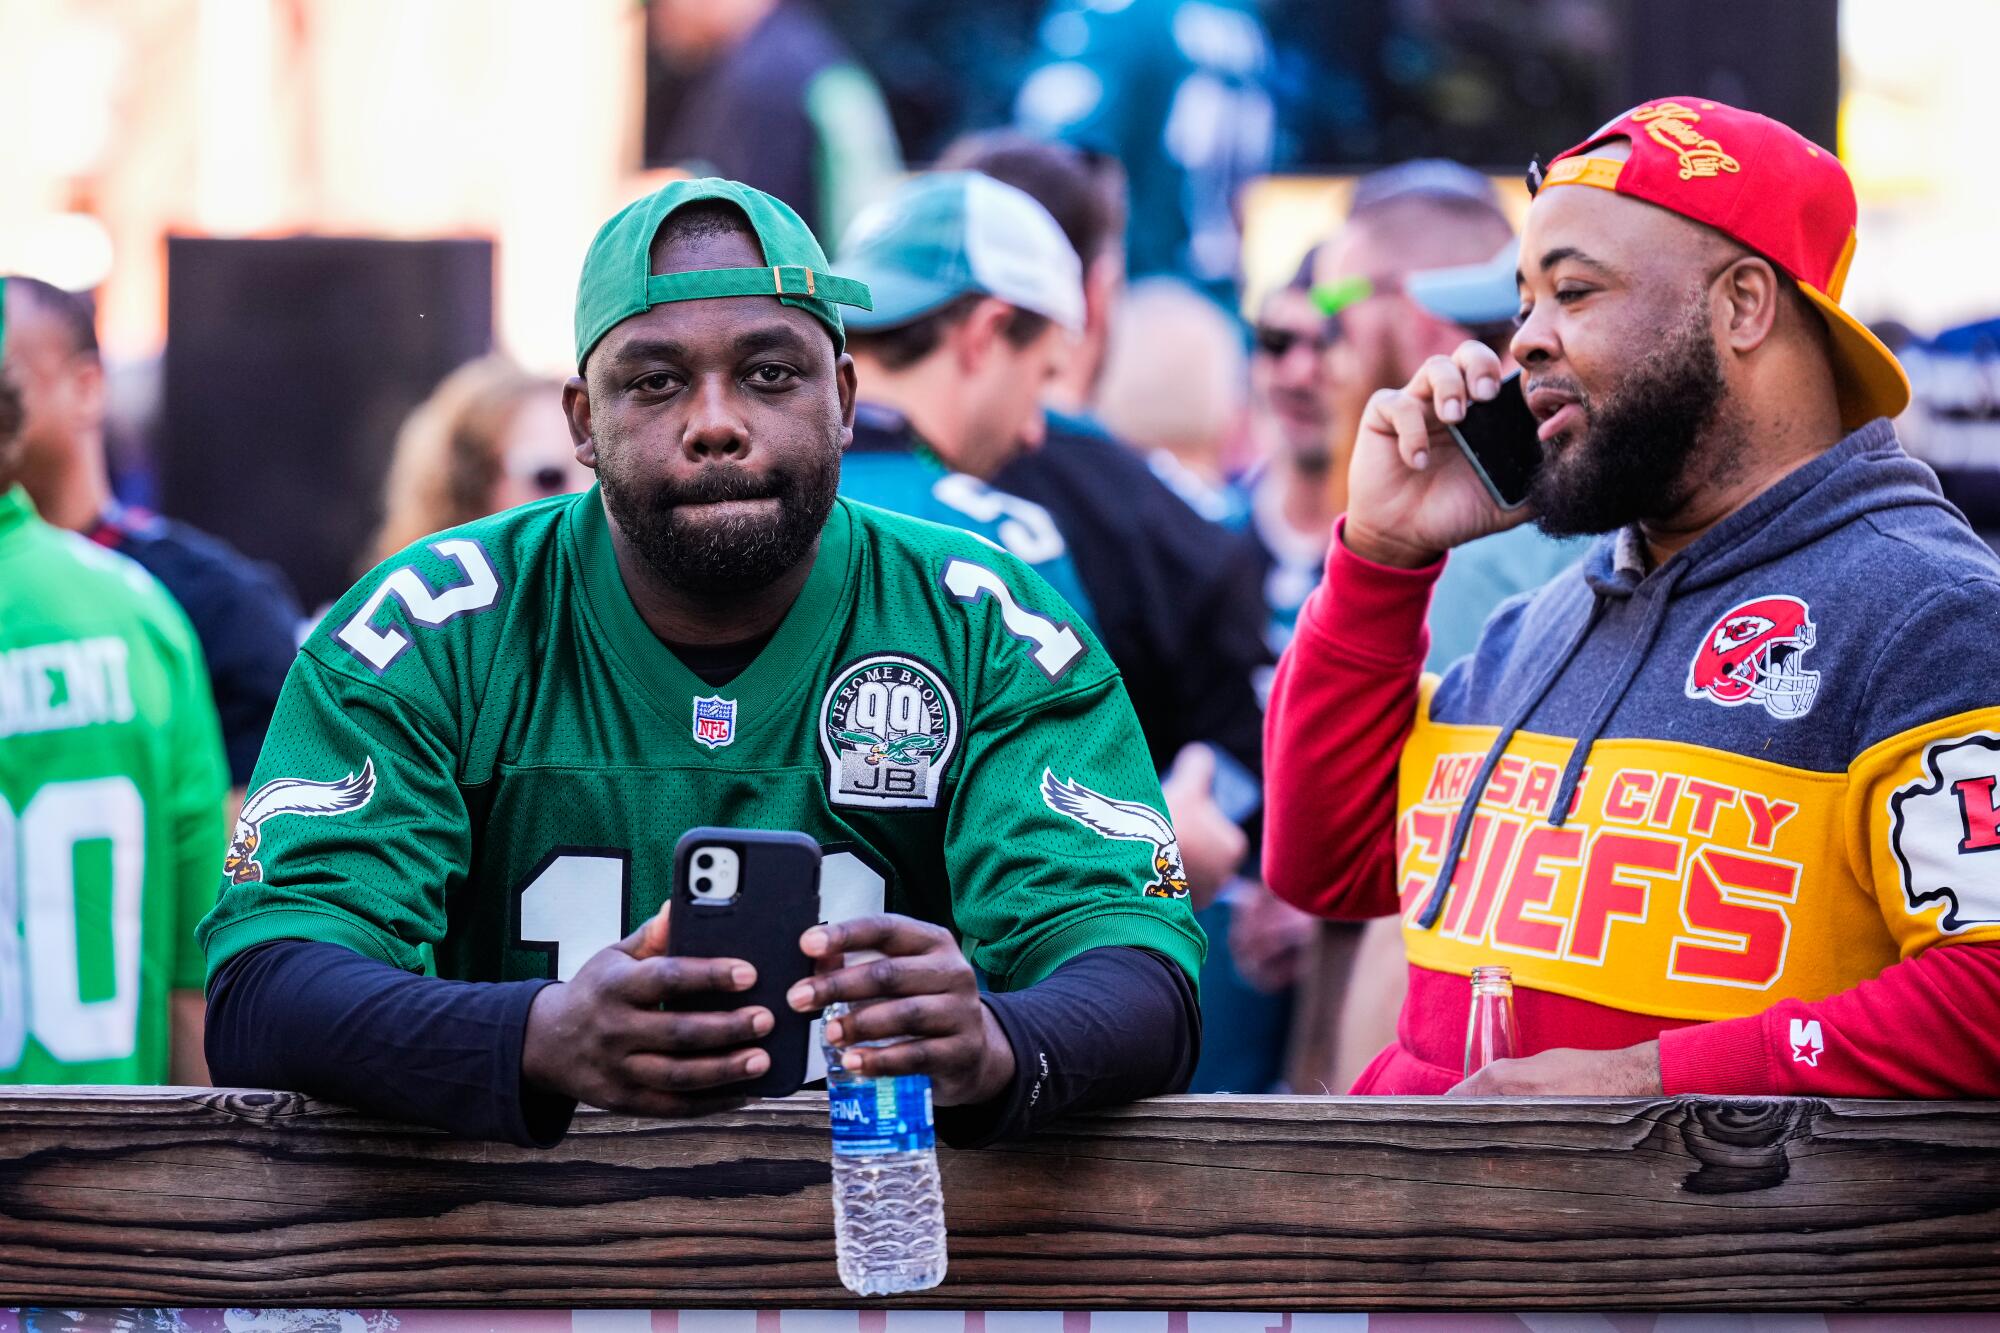 An Eagles fan stands beside a Chiefs fan during a Super Bowl tailgate party in Glendale, Arizona